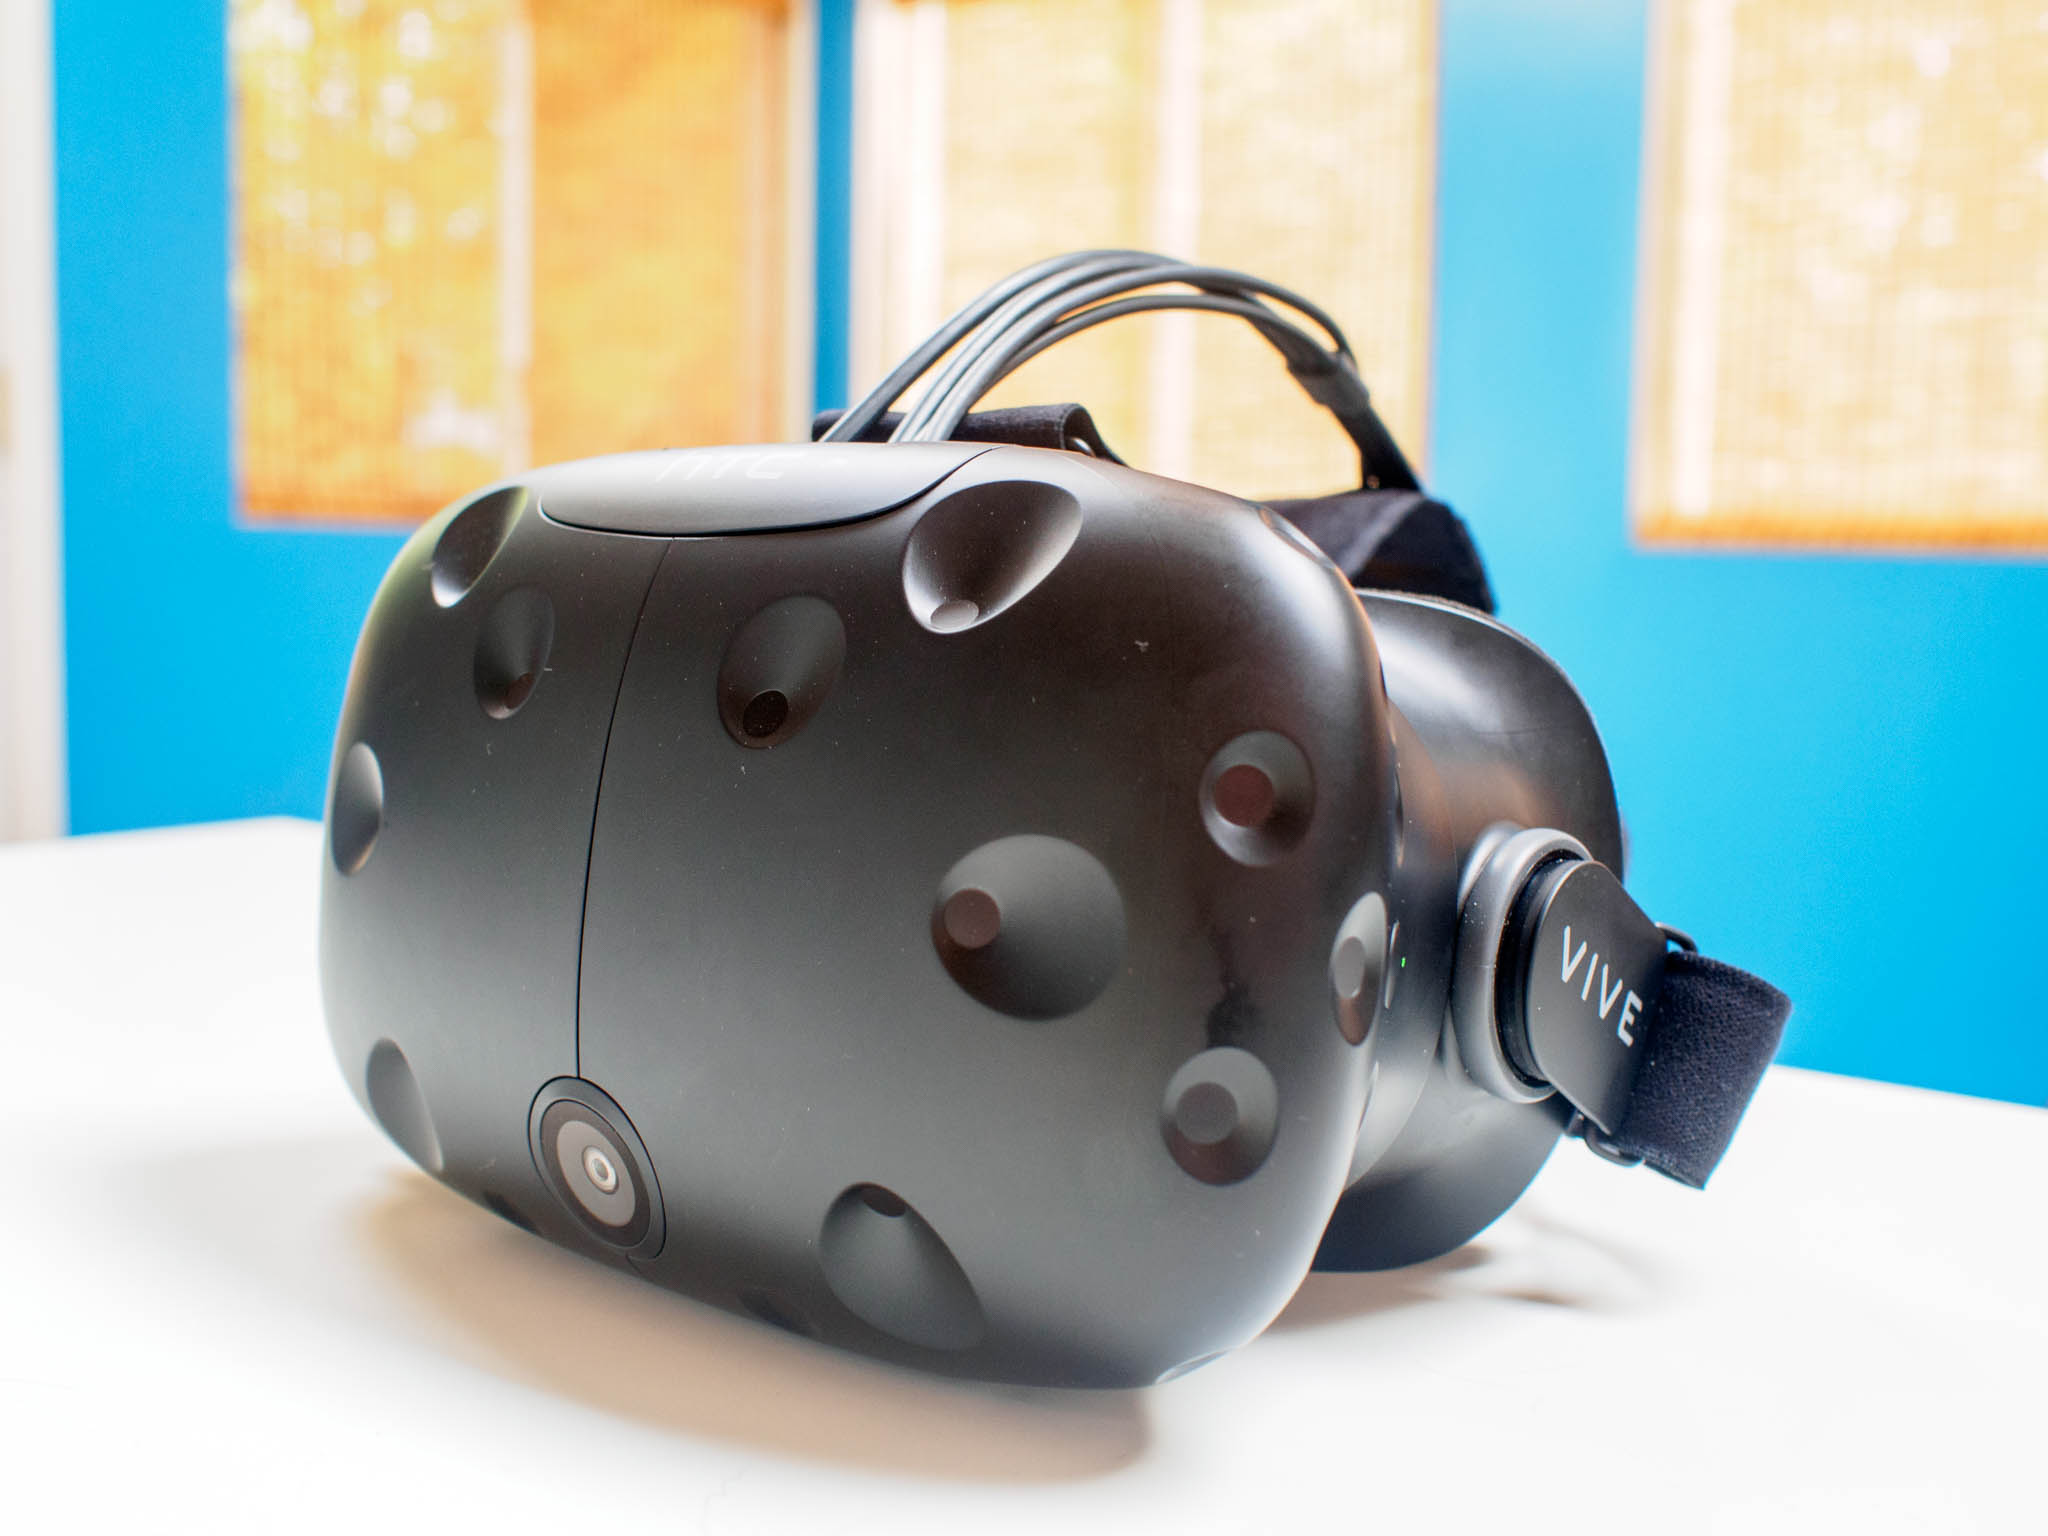 HTC Vive will soon be more expensive in the UK, thanks to post-Brexit pound devaluation